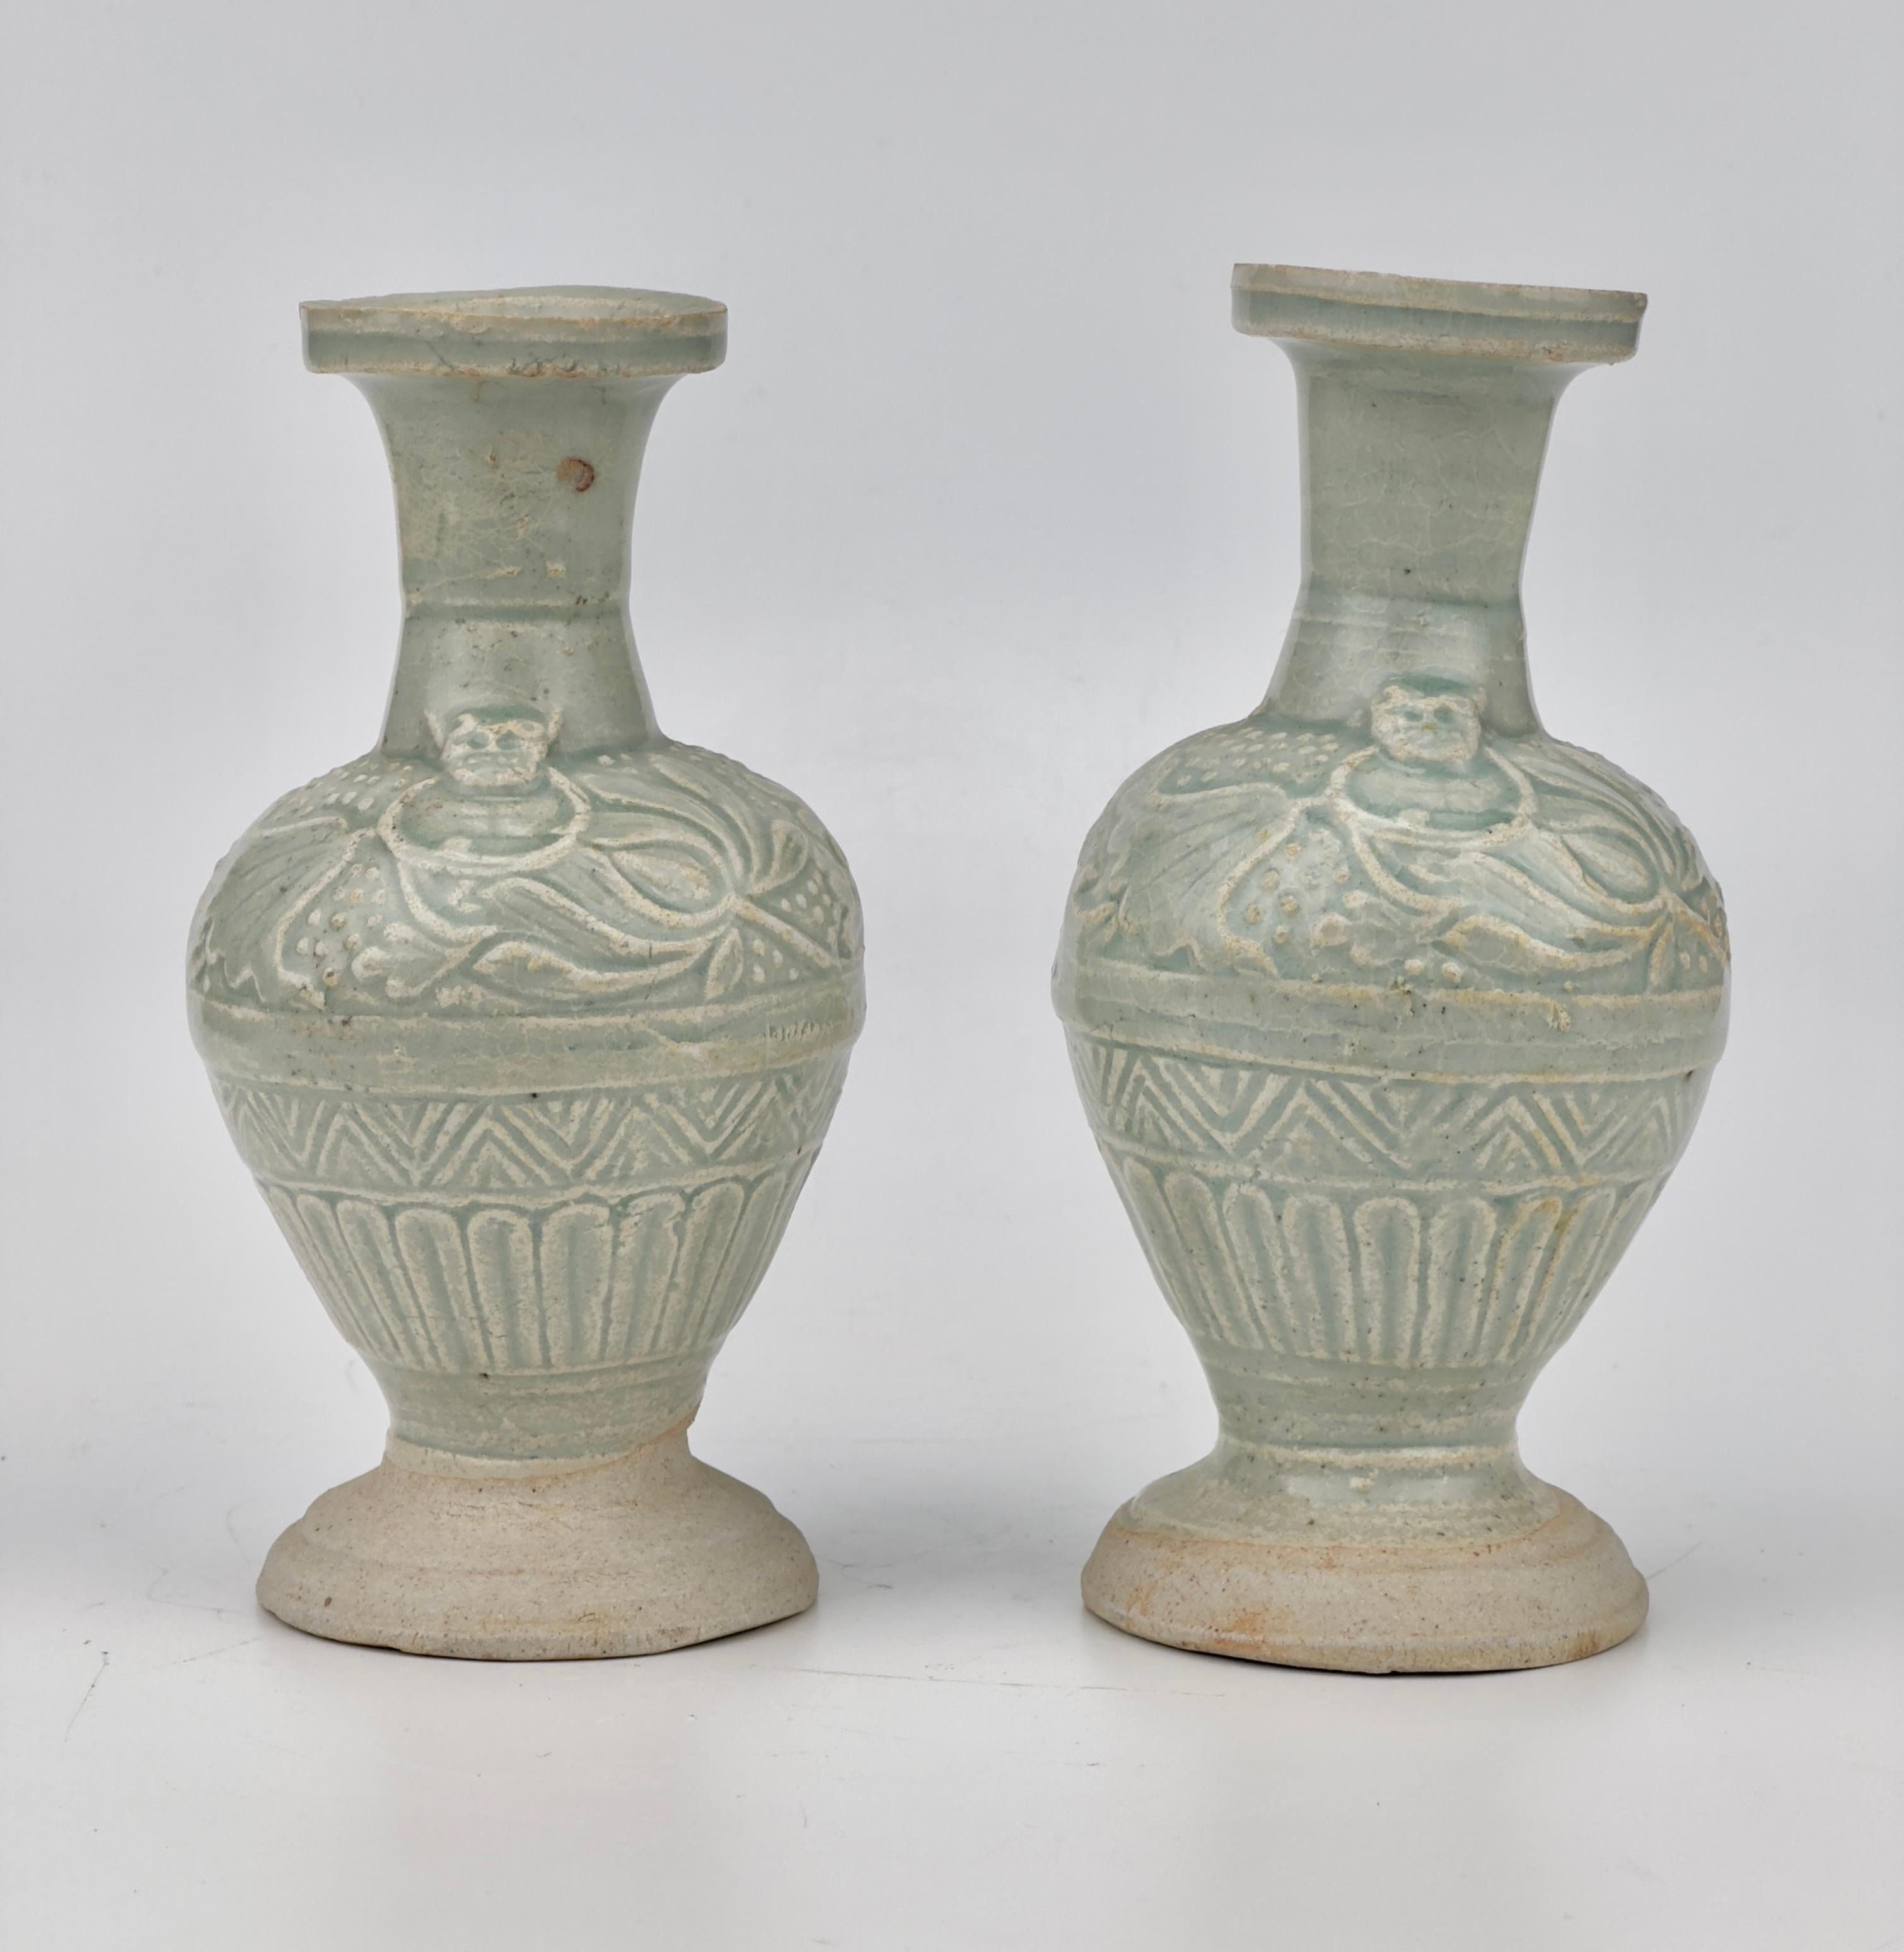 Porcelain with transparent pale-green (qingbai-type) glaze with flower, leaves and lotus design of typical yuan dynasty.

Period : Yuan Dynasty(1271-1368)
Type : Baluster vase
Medium : Qingbai Ware
Size : 15 cm(Height), 4.5cm(Mouth Diameter)